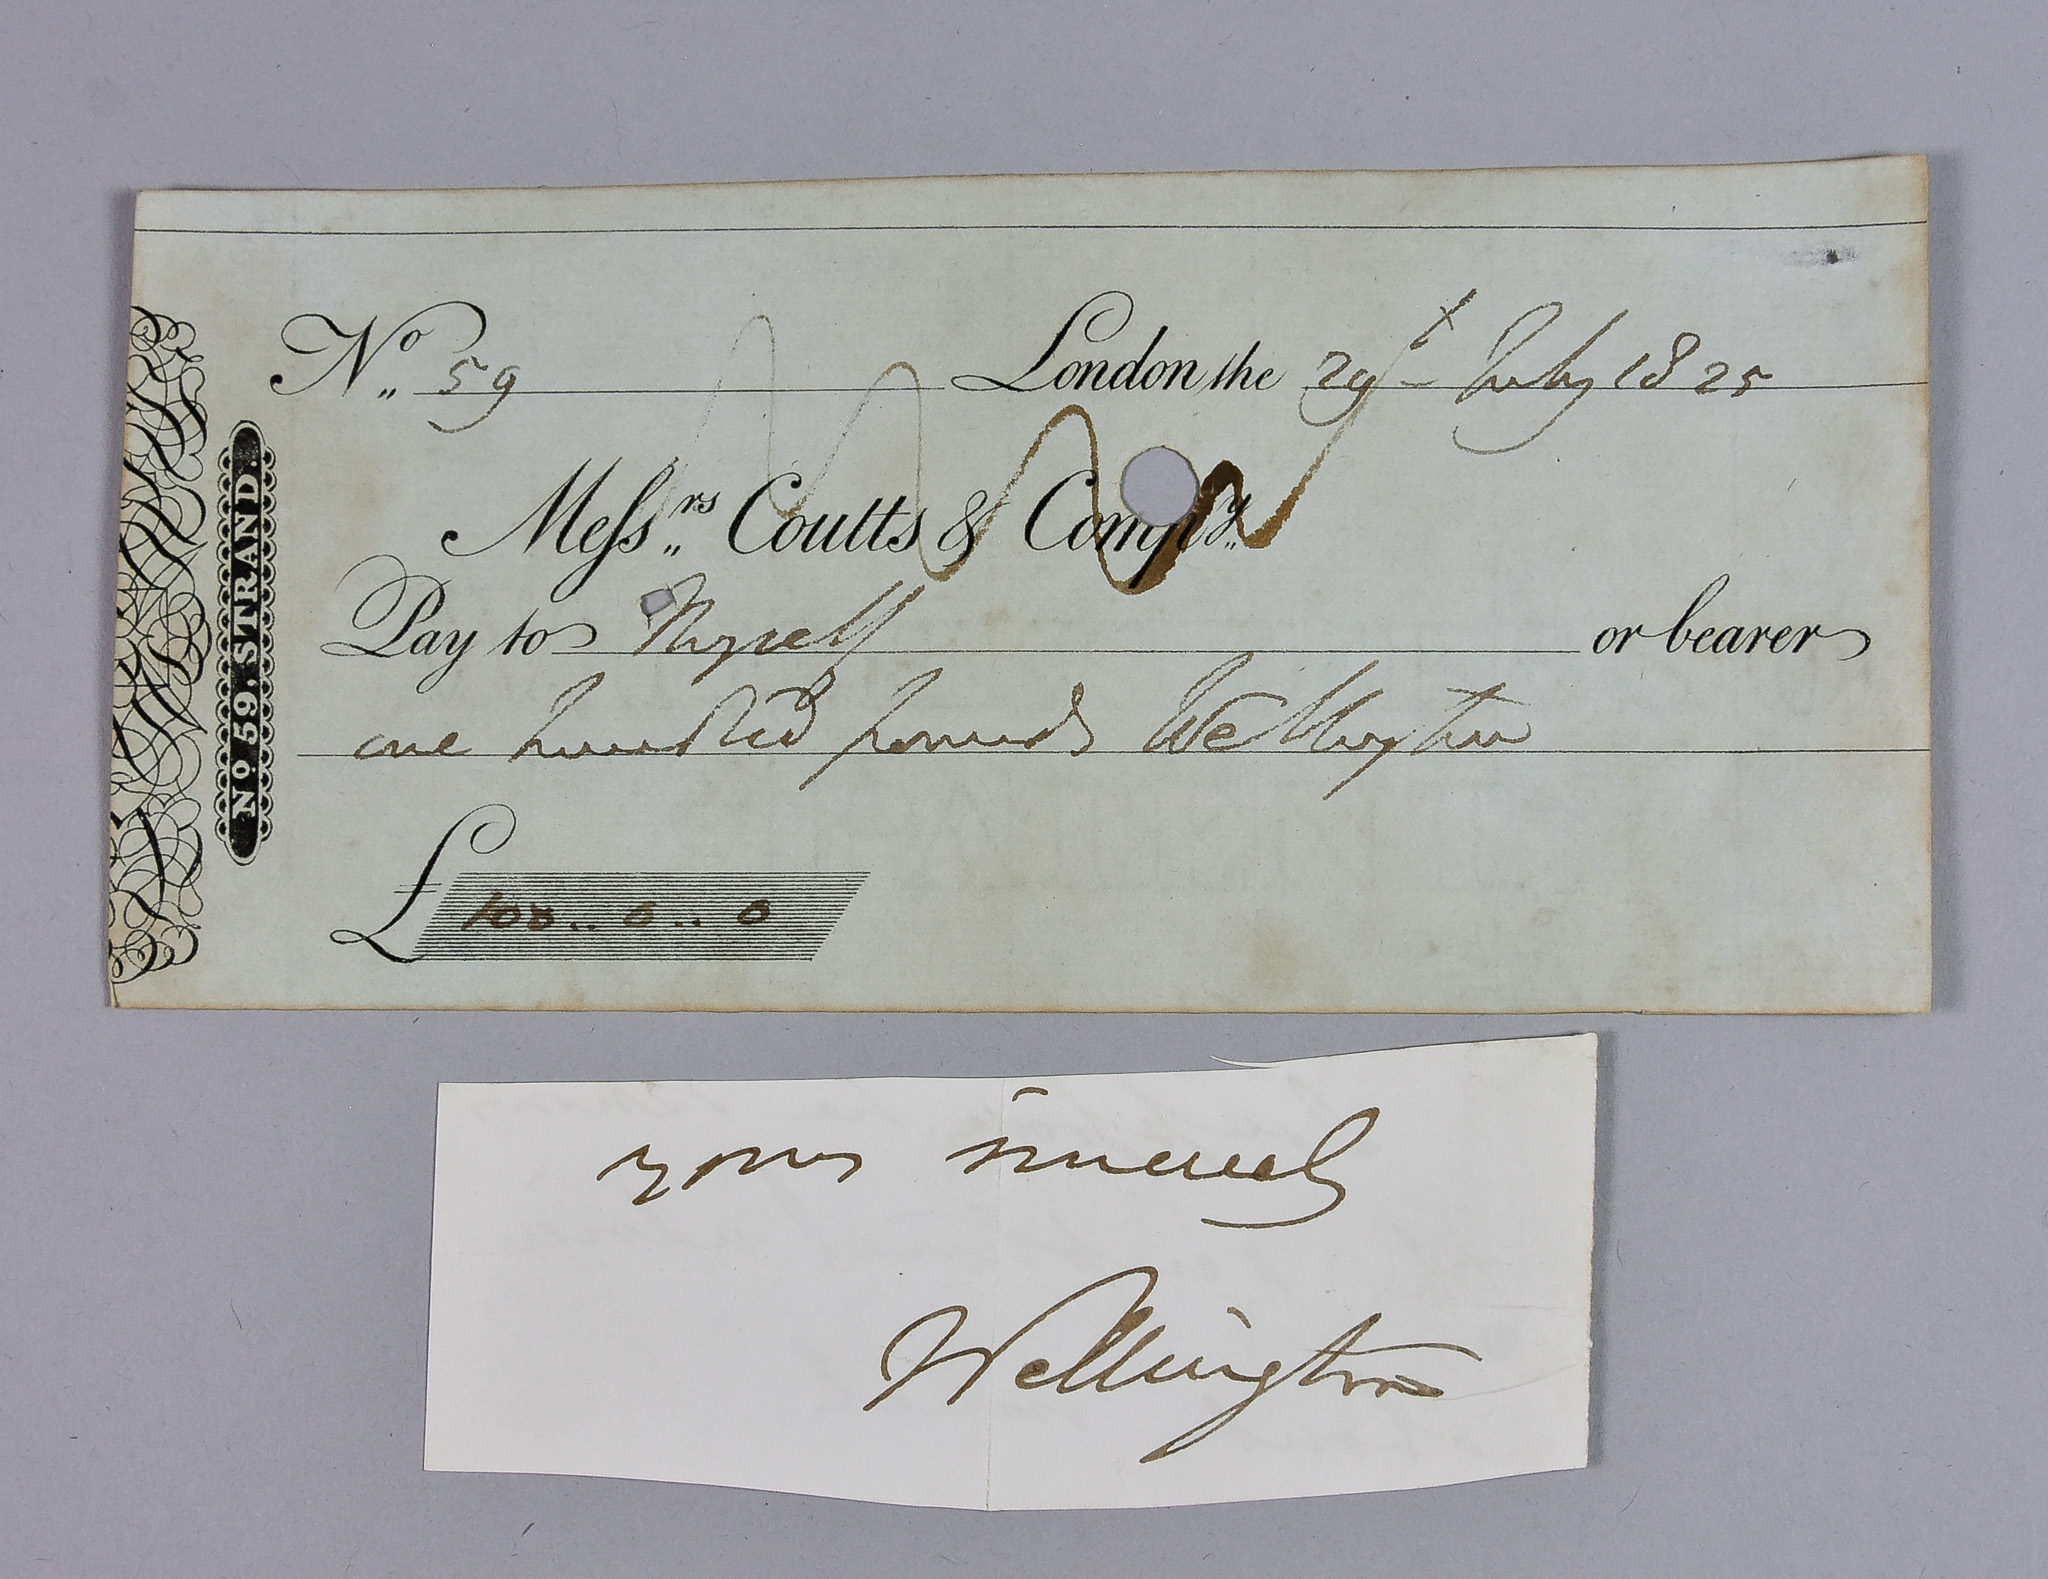 Arthur Wellesley, 1st Duke of Wellington (1769-1852) - A Coutts & Co. cheque number 59 dated 29th